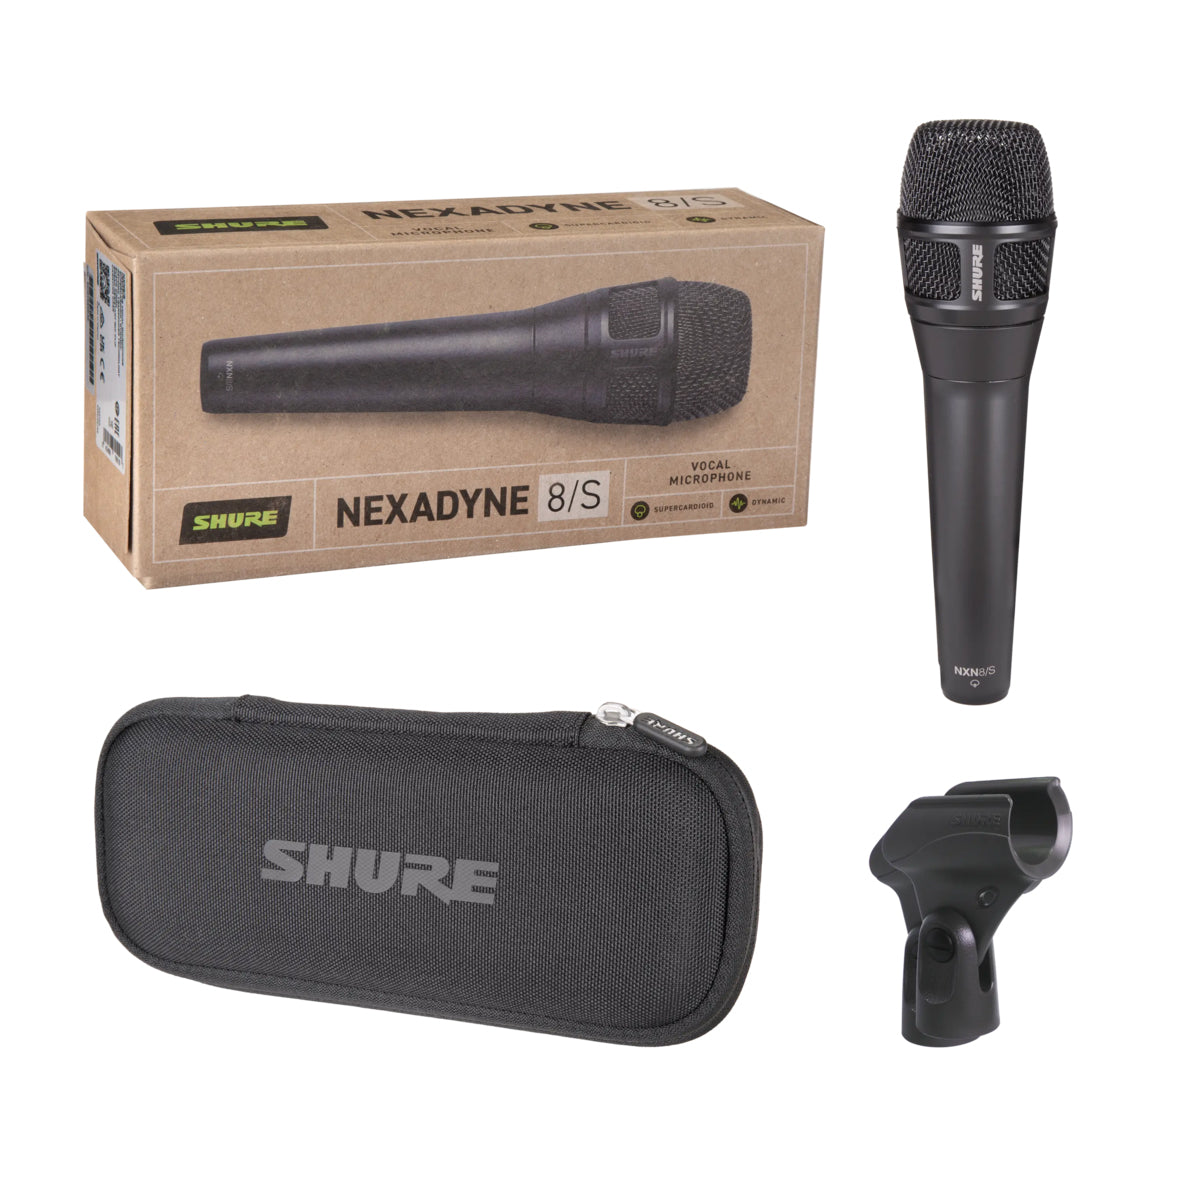 Shure NXN8/S Dynamic Super Cardiod Microphone shown with everything included